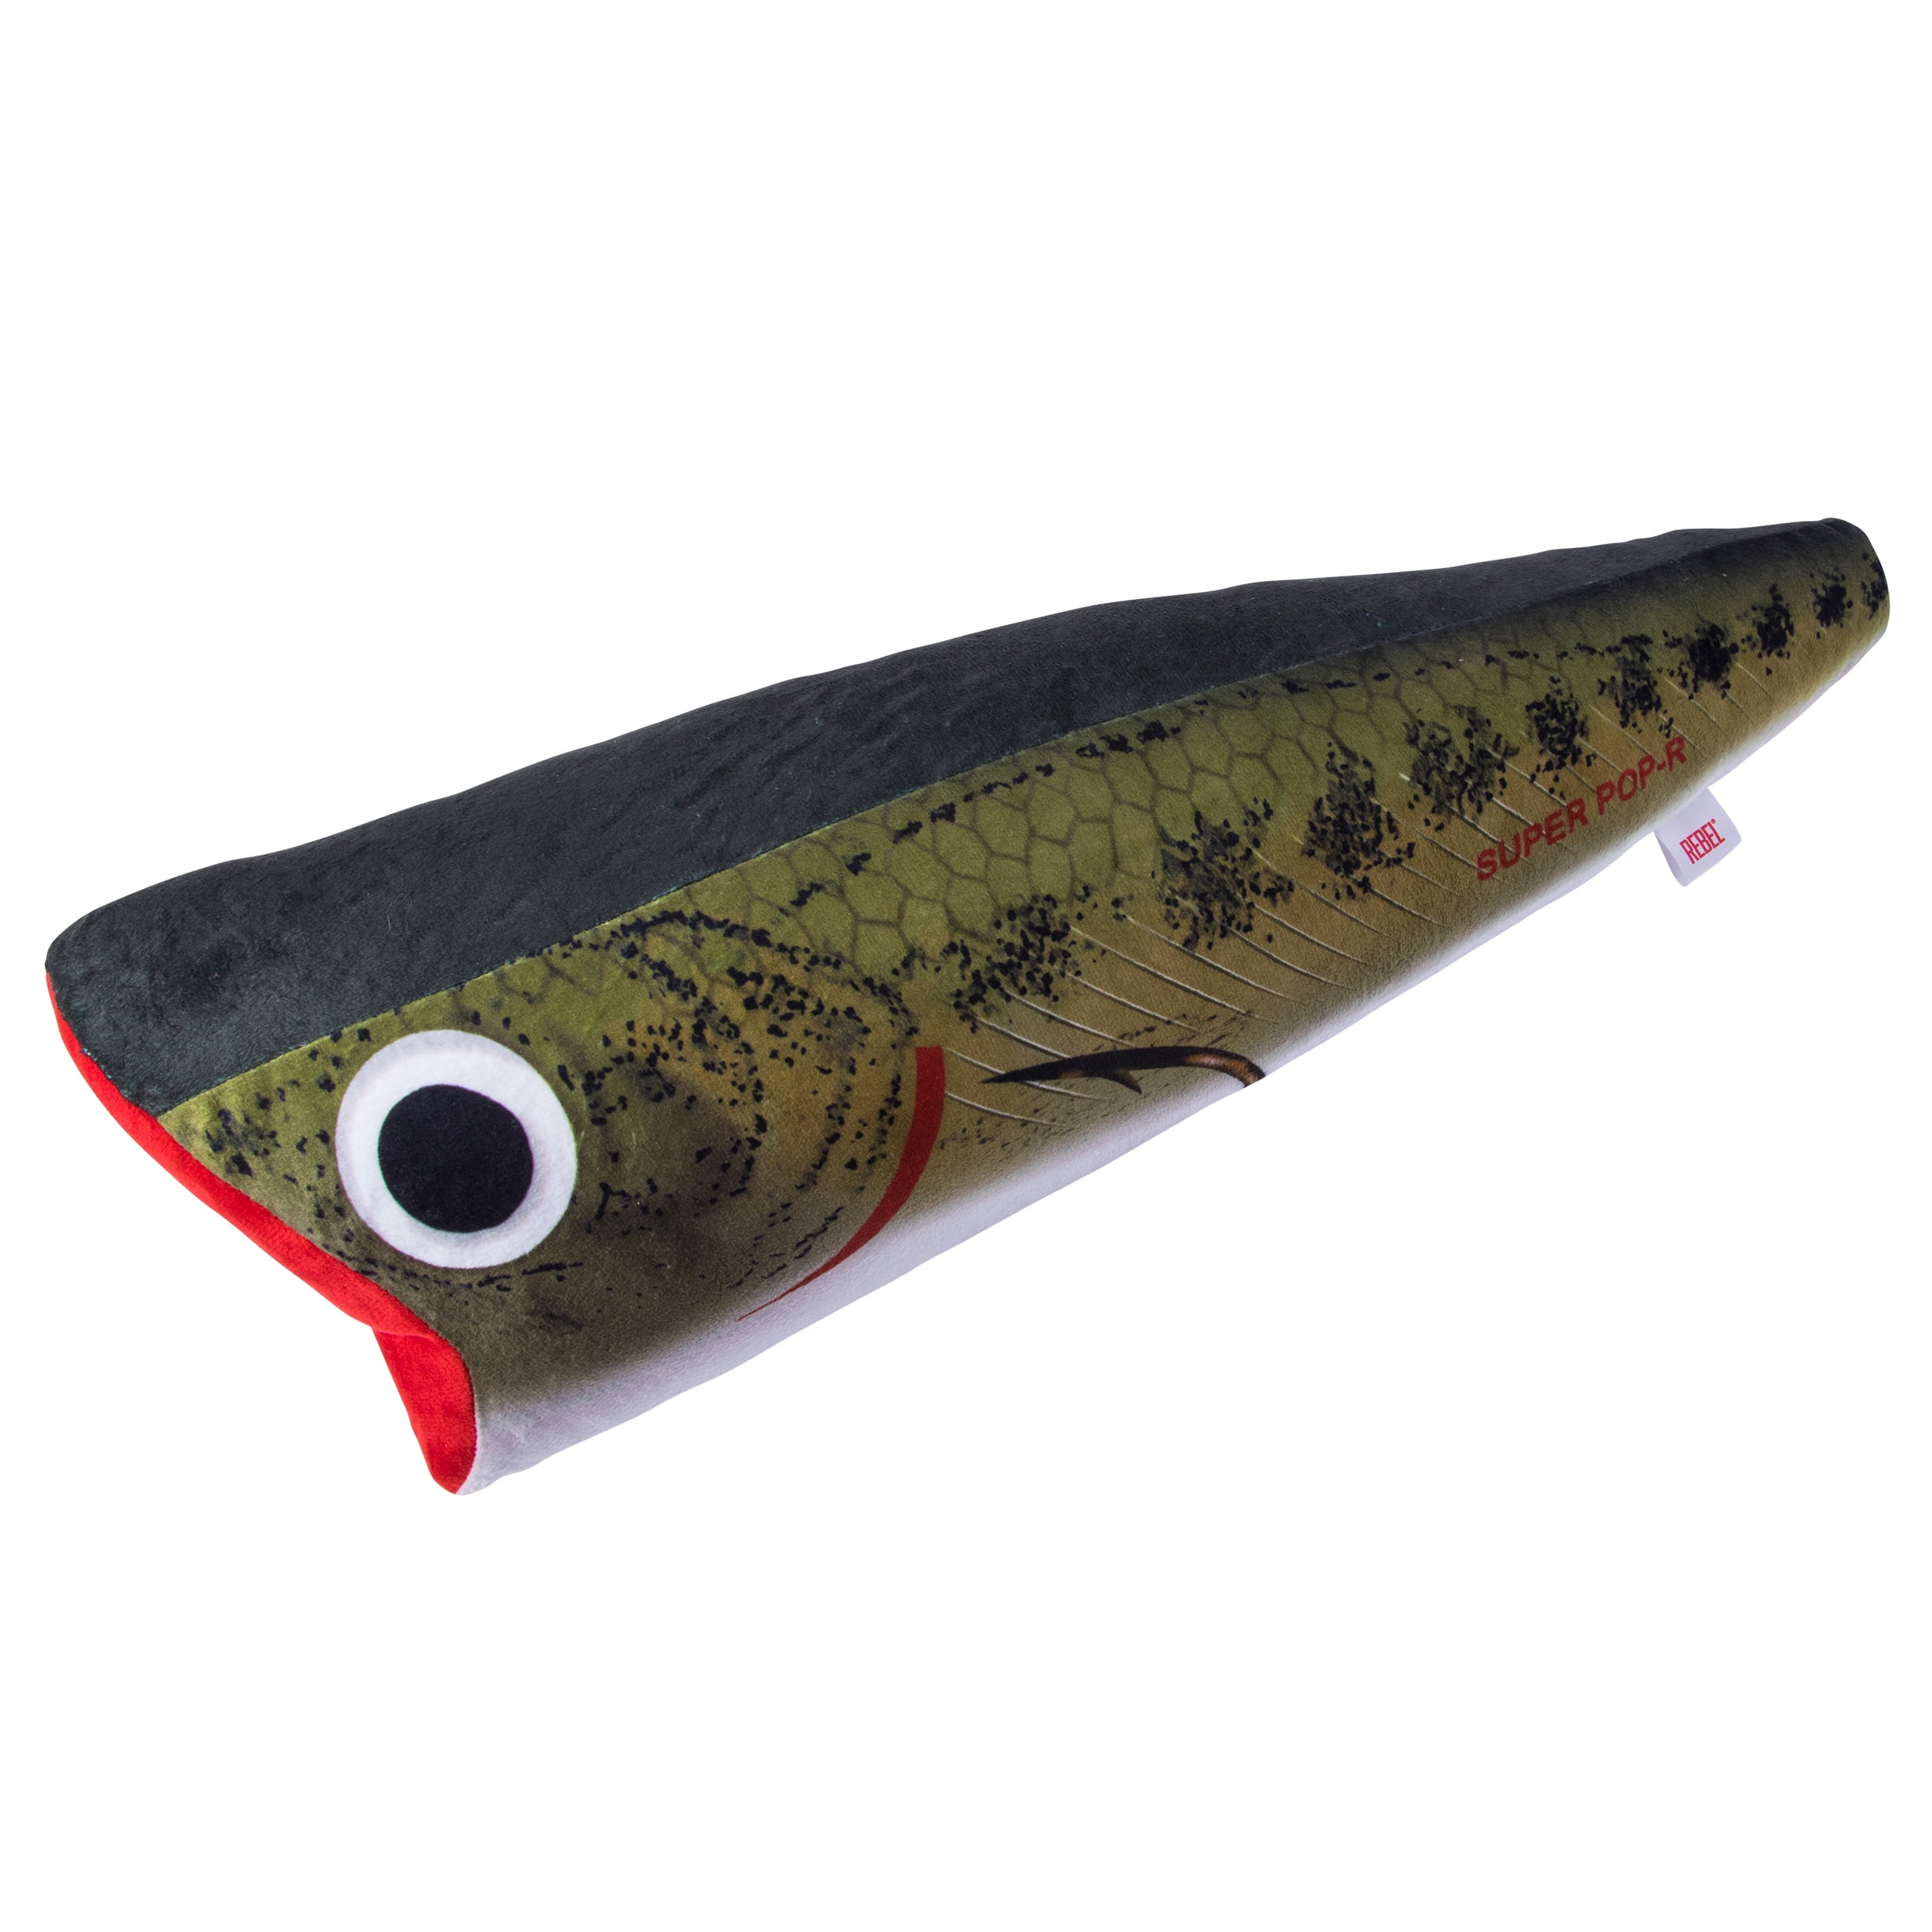 Rebel Lures P5048 Lures Teeny Pop R Fishing Lure (2-Inch